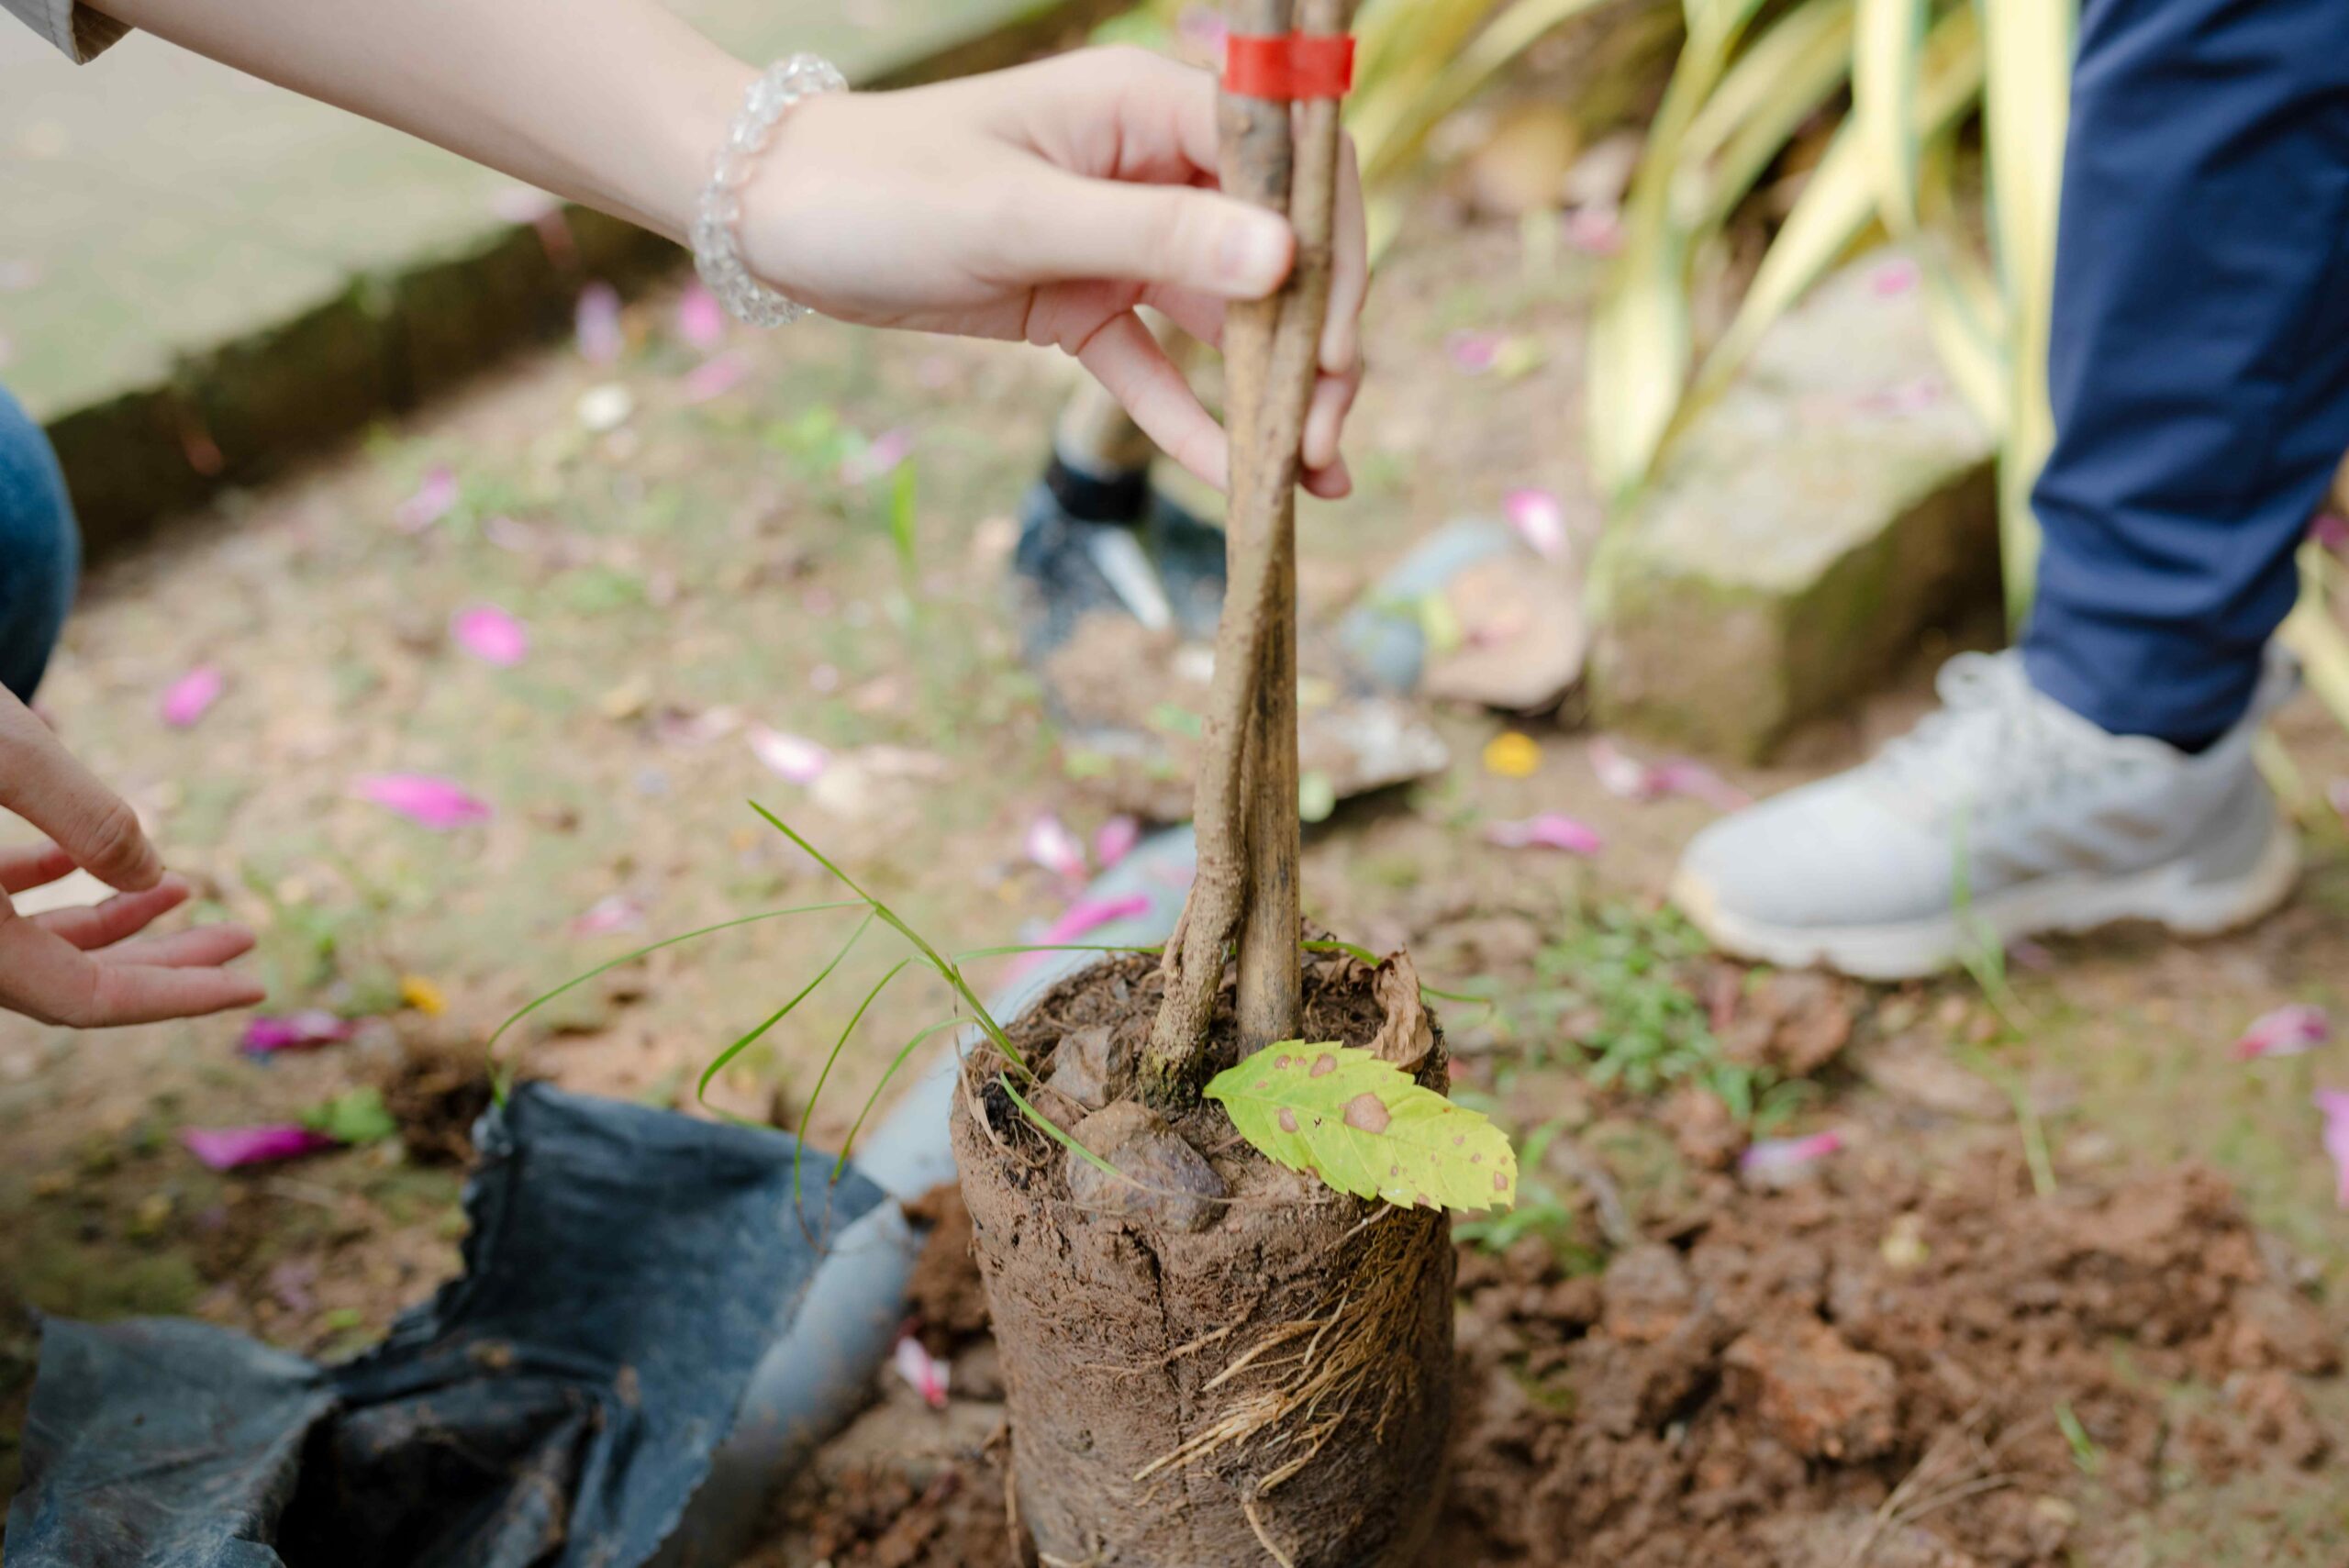 GIONG TROM DISTRICT – BEN TRE PROVINCE: CULTIVATE A GREENER AND CLEANER RURAL AREA THROUGH TREE PLANTING